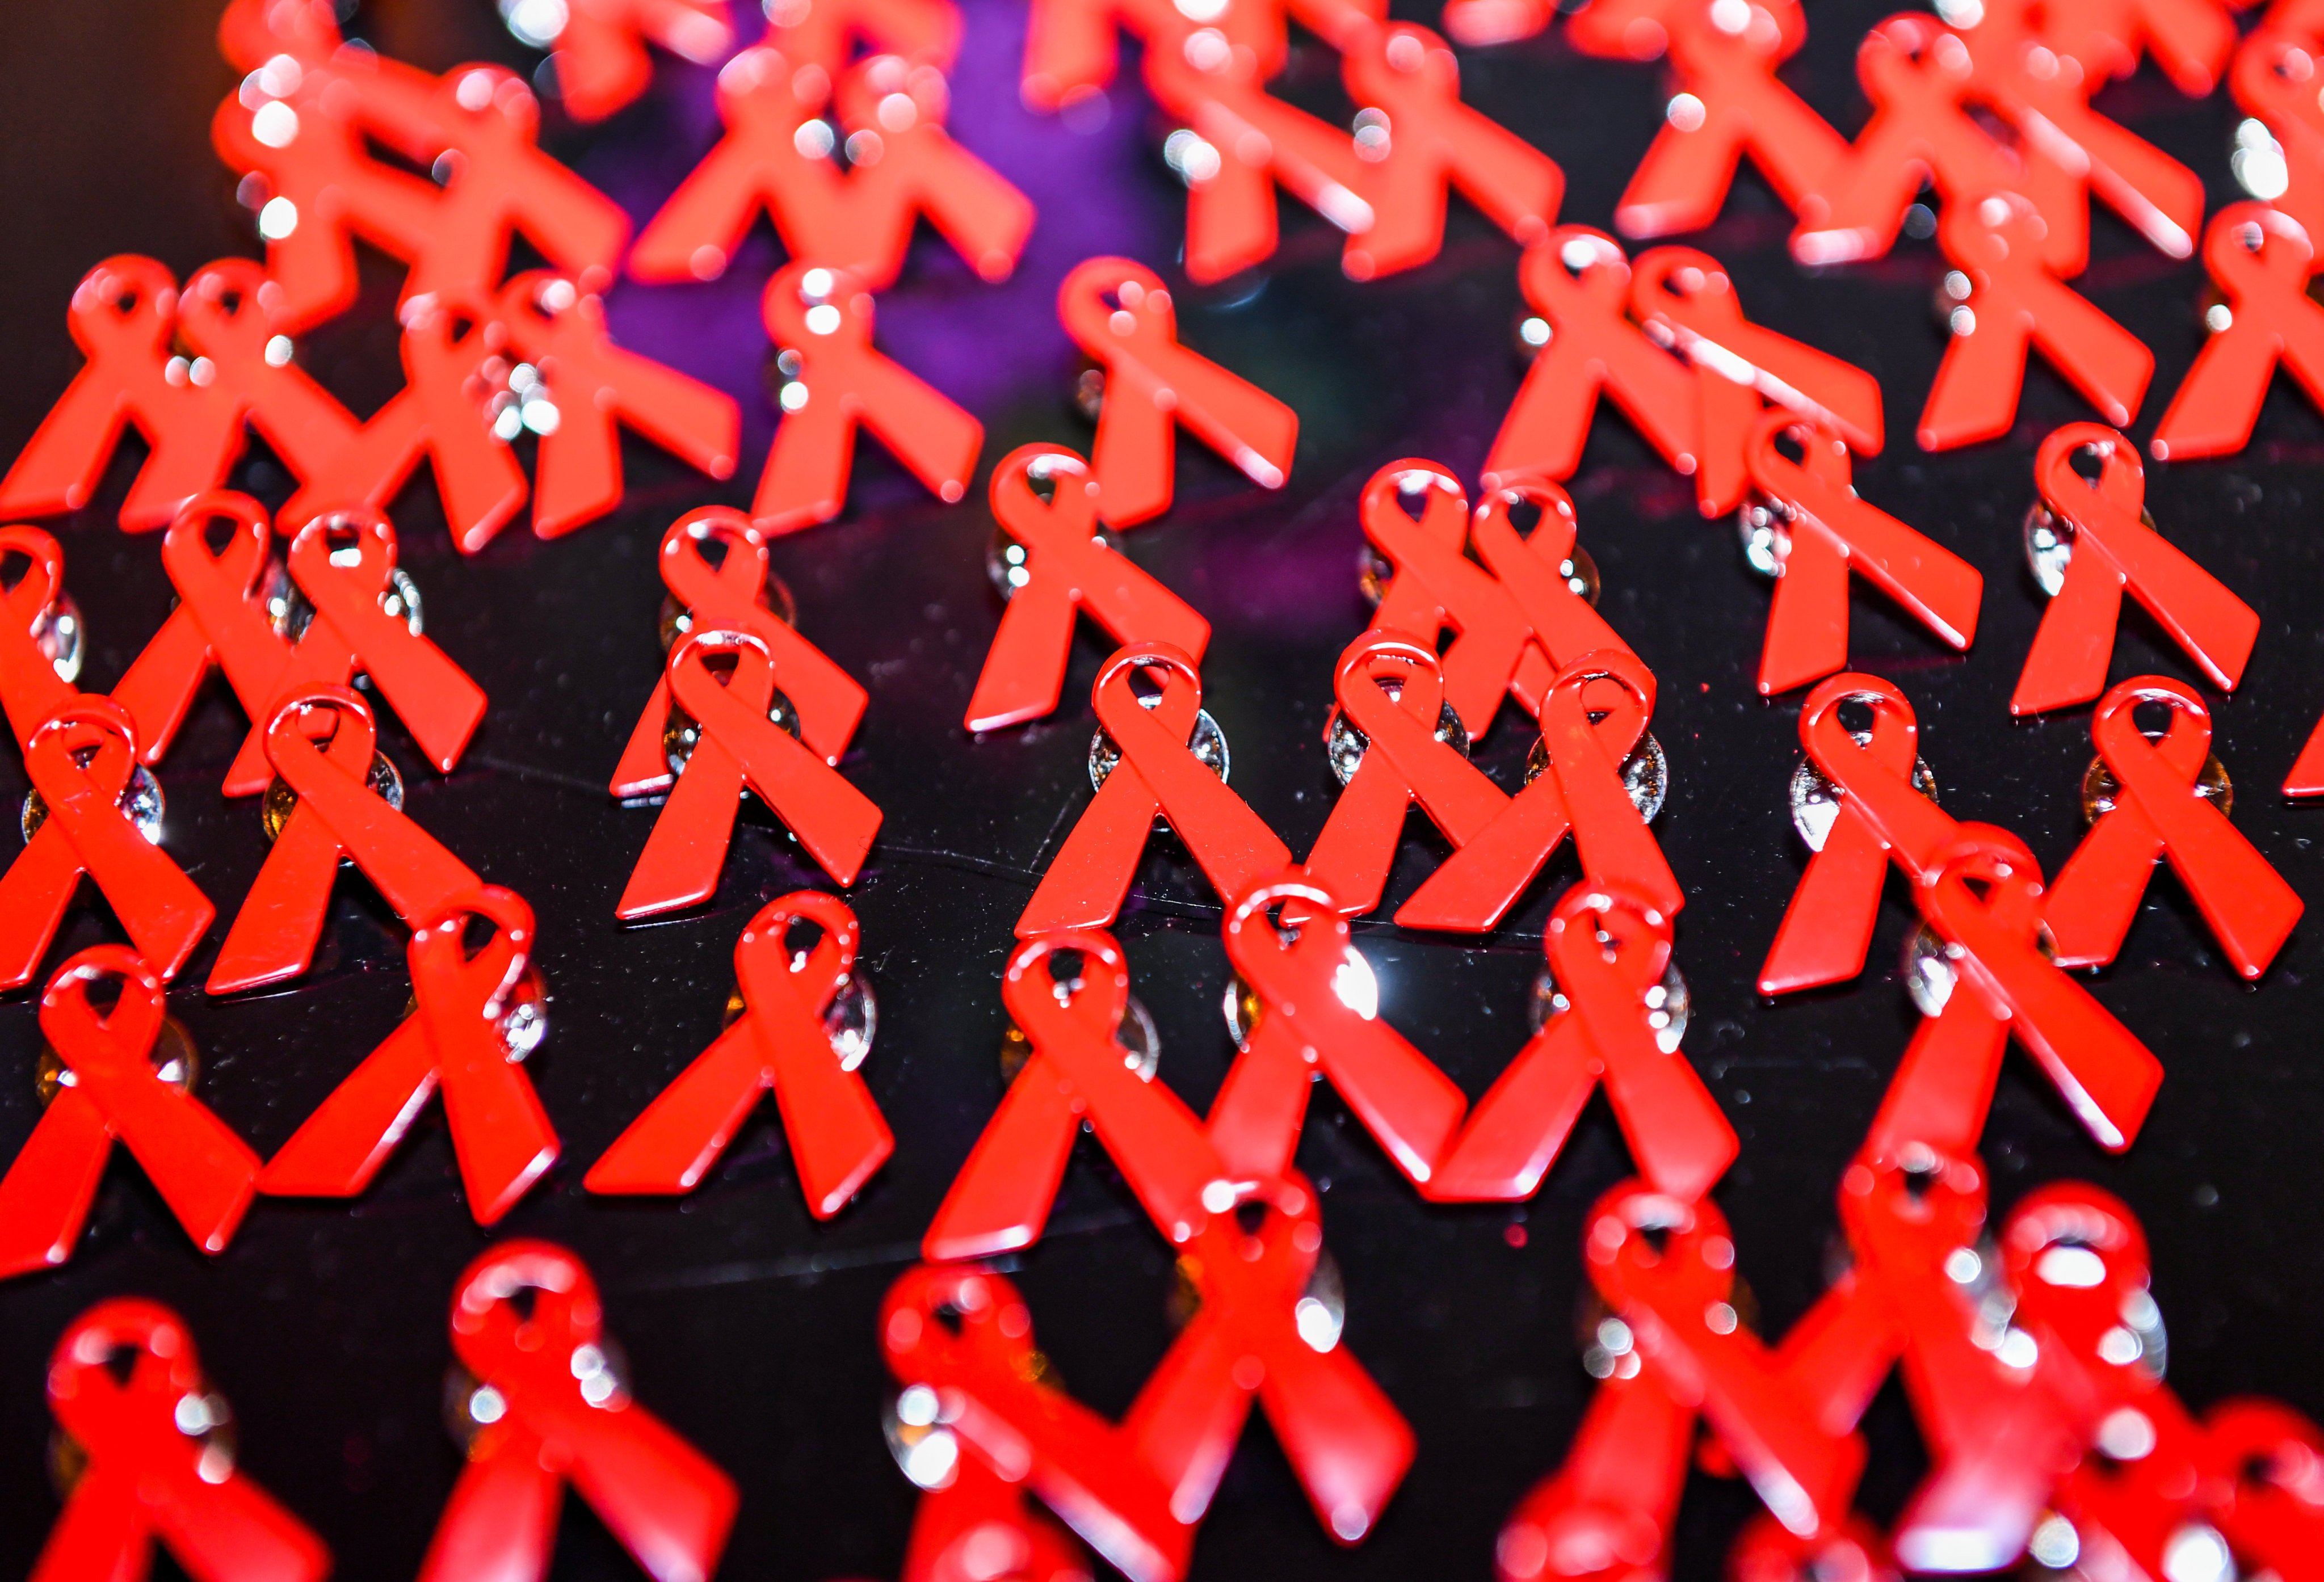 The red ribbon is a universal symbol of awareness and support for people living with HIV. Photo: dpa